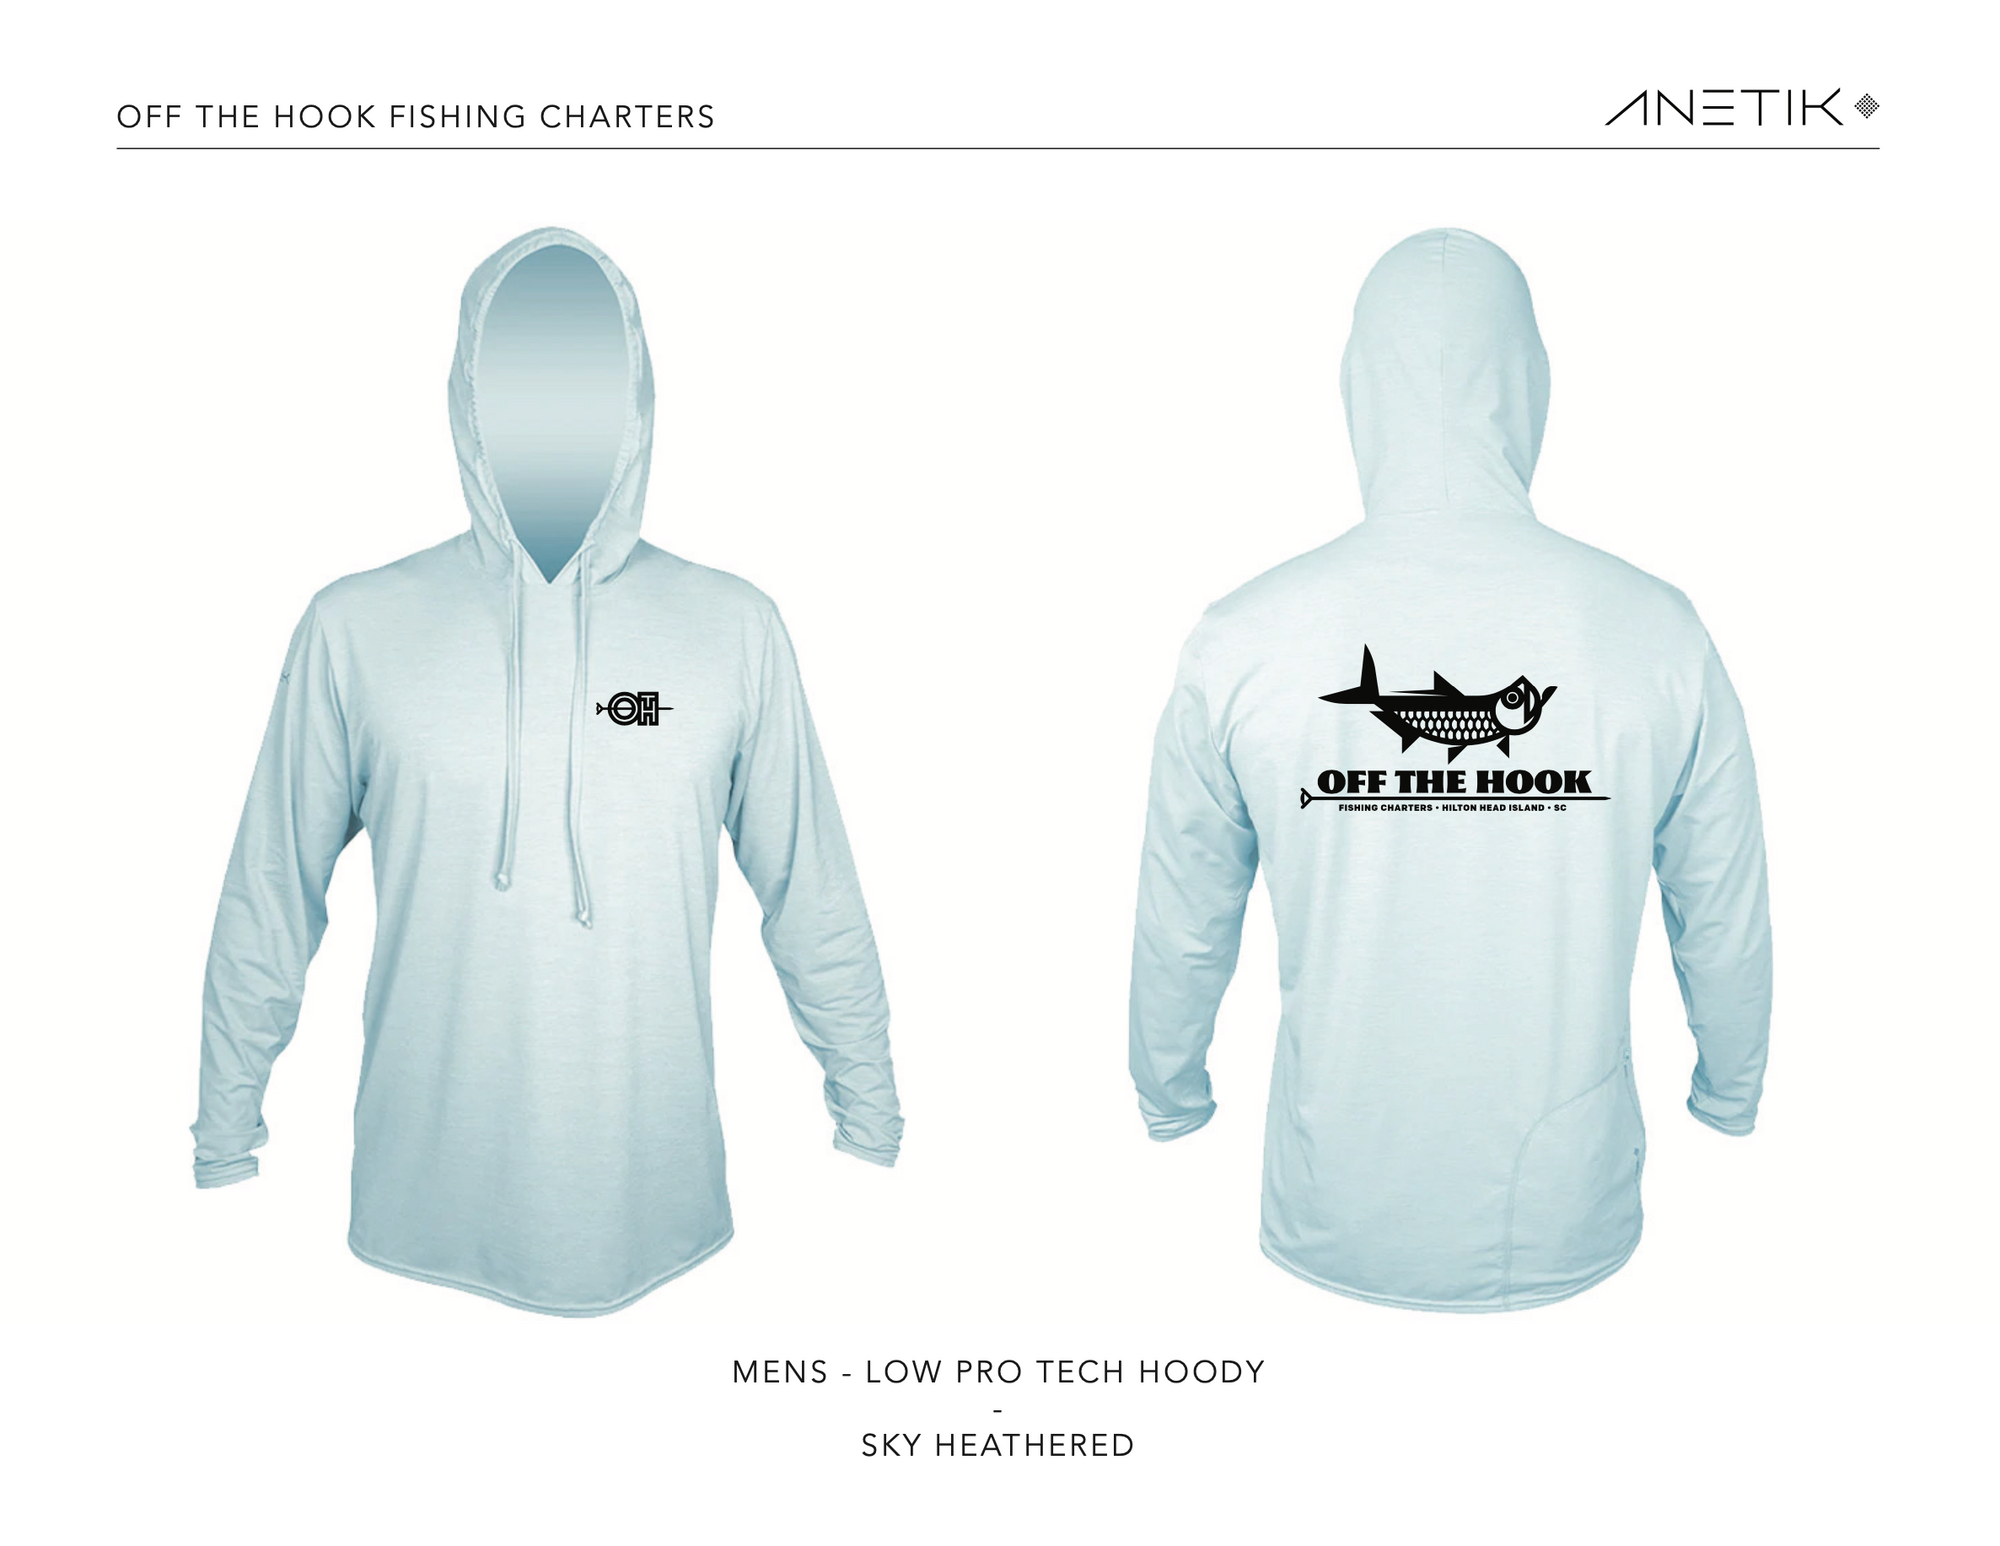 OFF THE HOOK Shirts - Off The Hook Fishing Charters